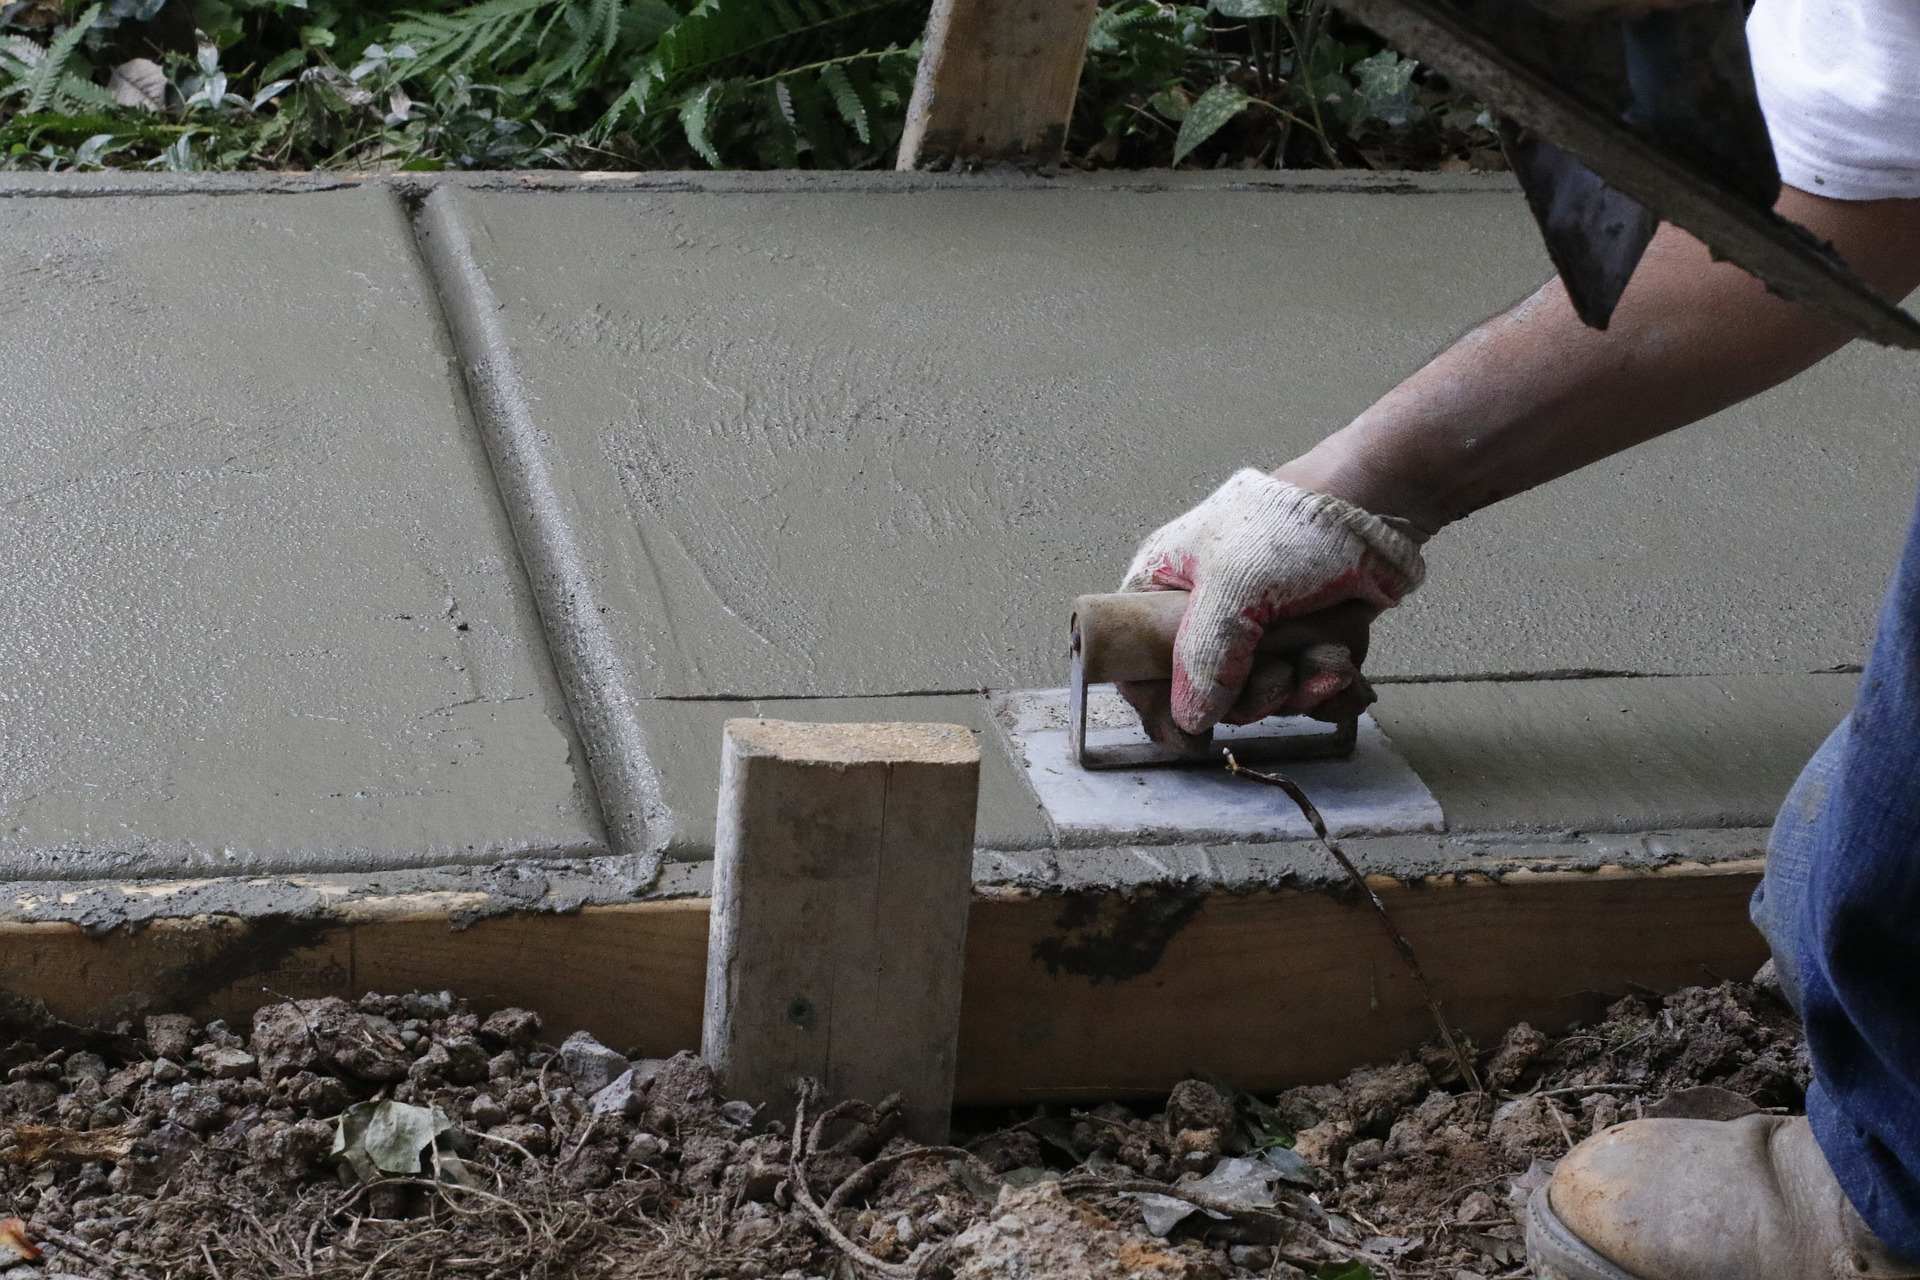 A person using a sander to smooth the concrete.